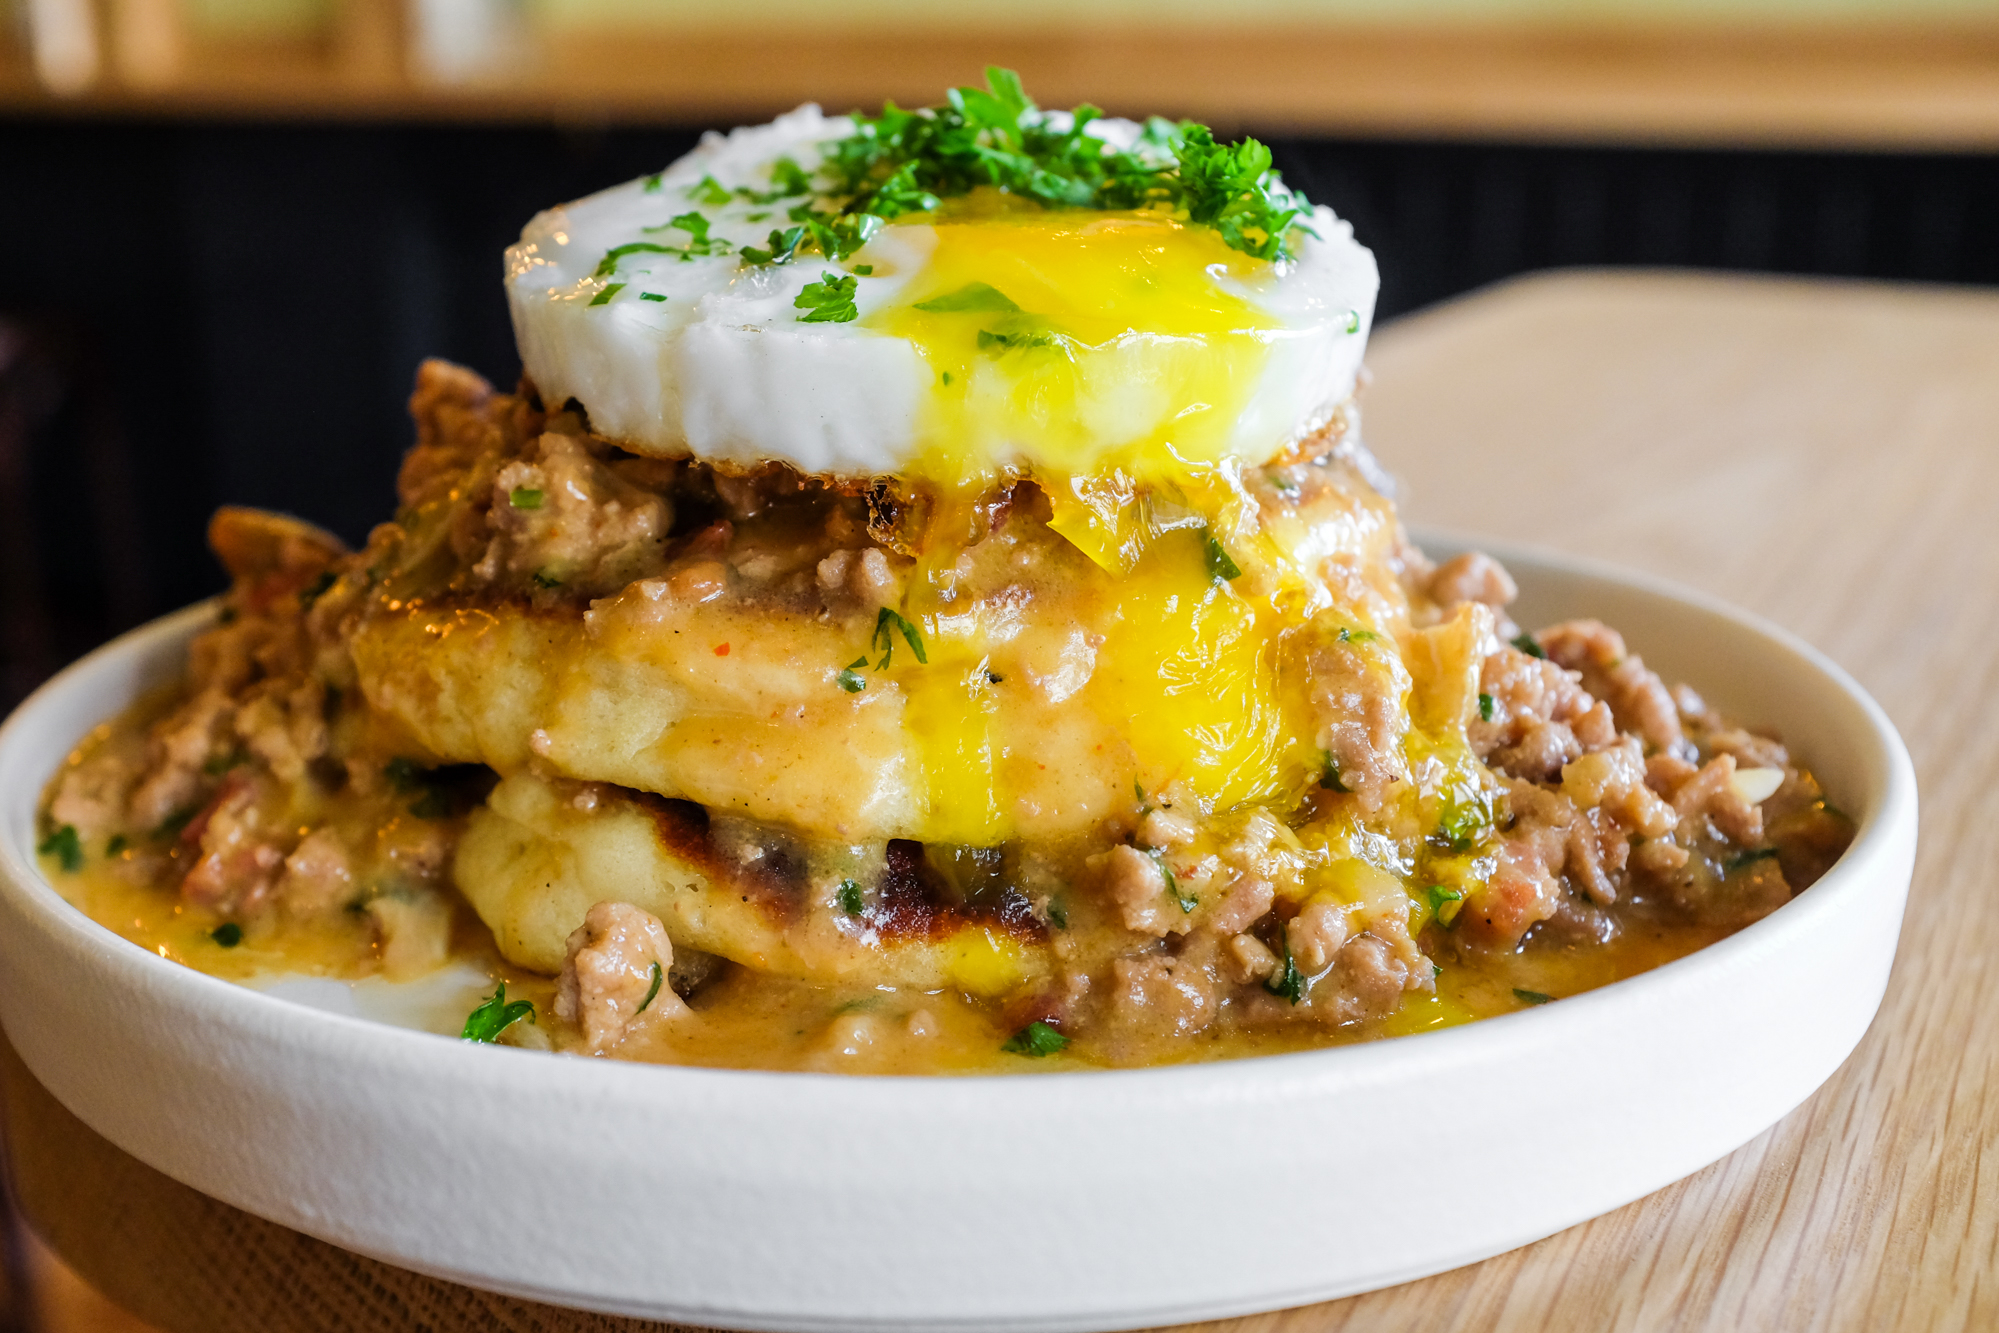 A duck egg is perched on a stack of pancakes at Canard, drizzled with duck sausage gravy and chopped herbs.